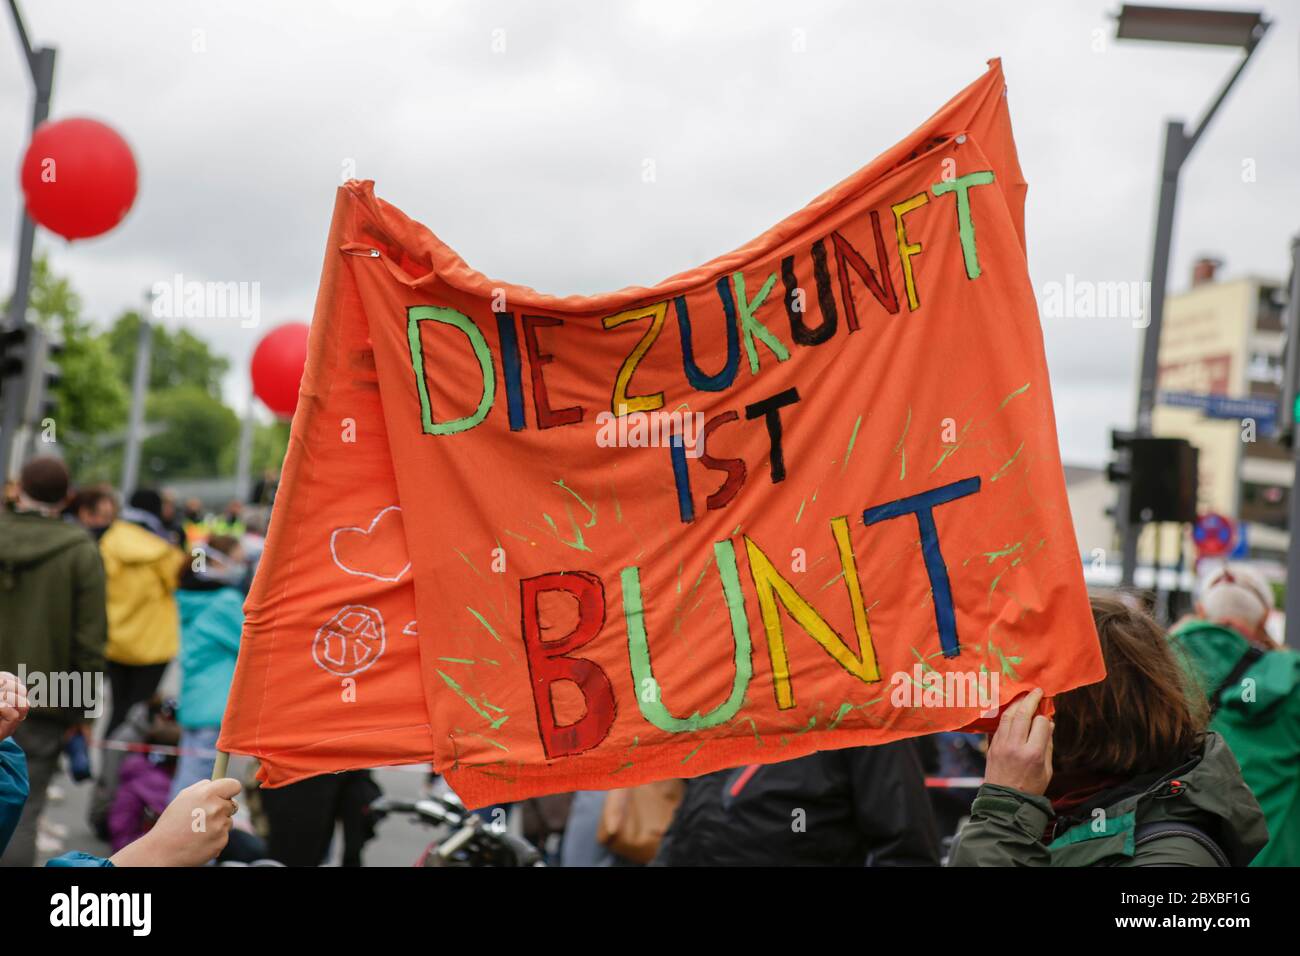 Worms, Germany. 6th June 2020. Protesters hold a banner that reads “The future is colourful”. Around 50 right-wing protesters marched through the city centre of Worms for the 12. and last 'Day of the German Future’. The march was cut short due to several hundred counter protesters who blocked the  path of the right-wing march. The march was a yearly right-wing event in different German city that drew over 1000 protesters at its high-point. Stock Photo